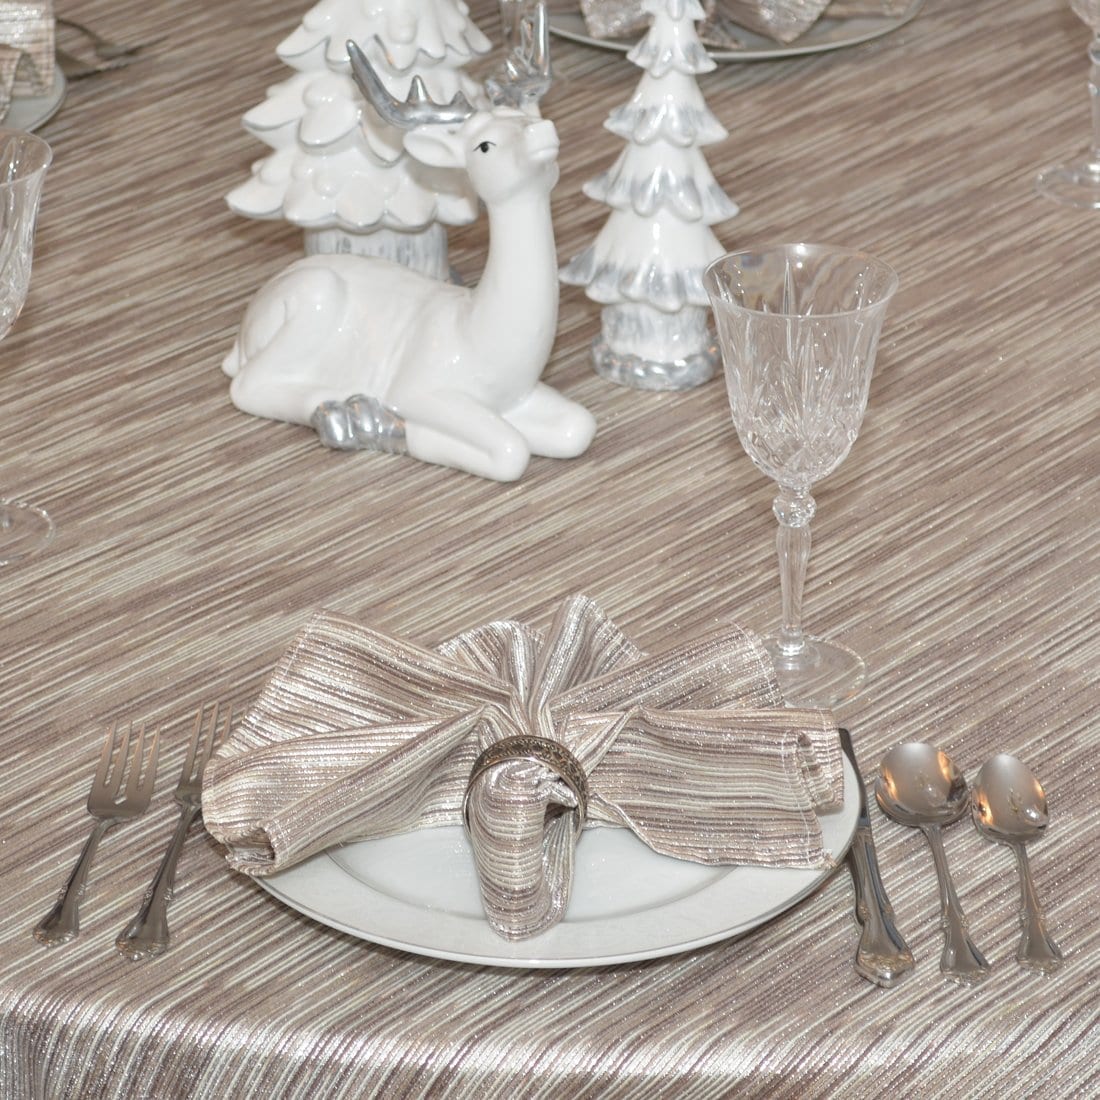 Sweet Pea Linens - Brown & Cream with Silver Metallic Striped 90 inch Round Table Cloth (SKU#: R-1009-U9) - Table Setting